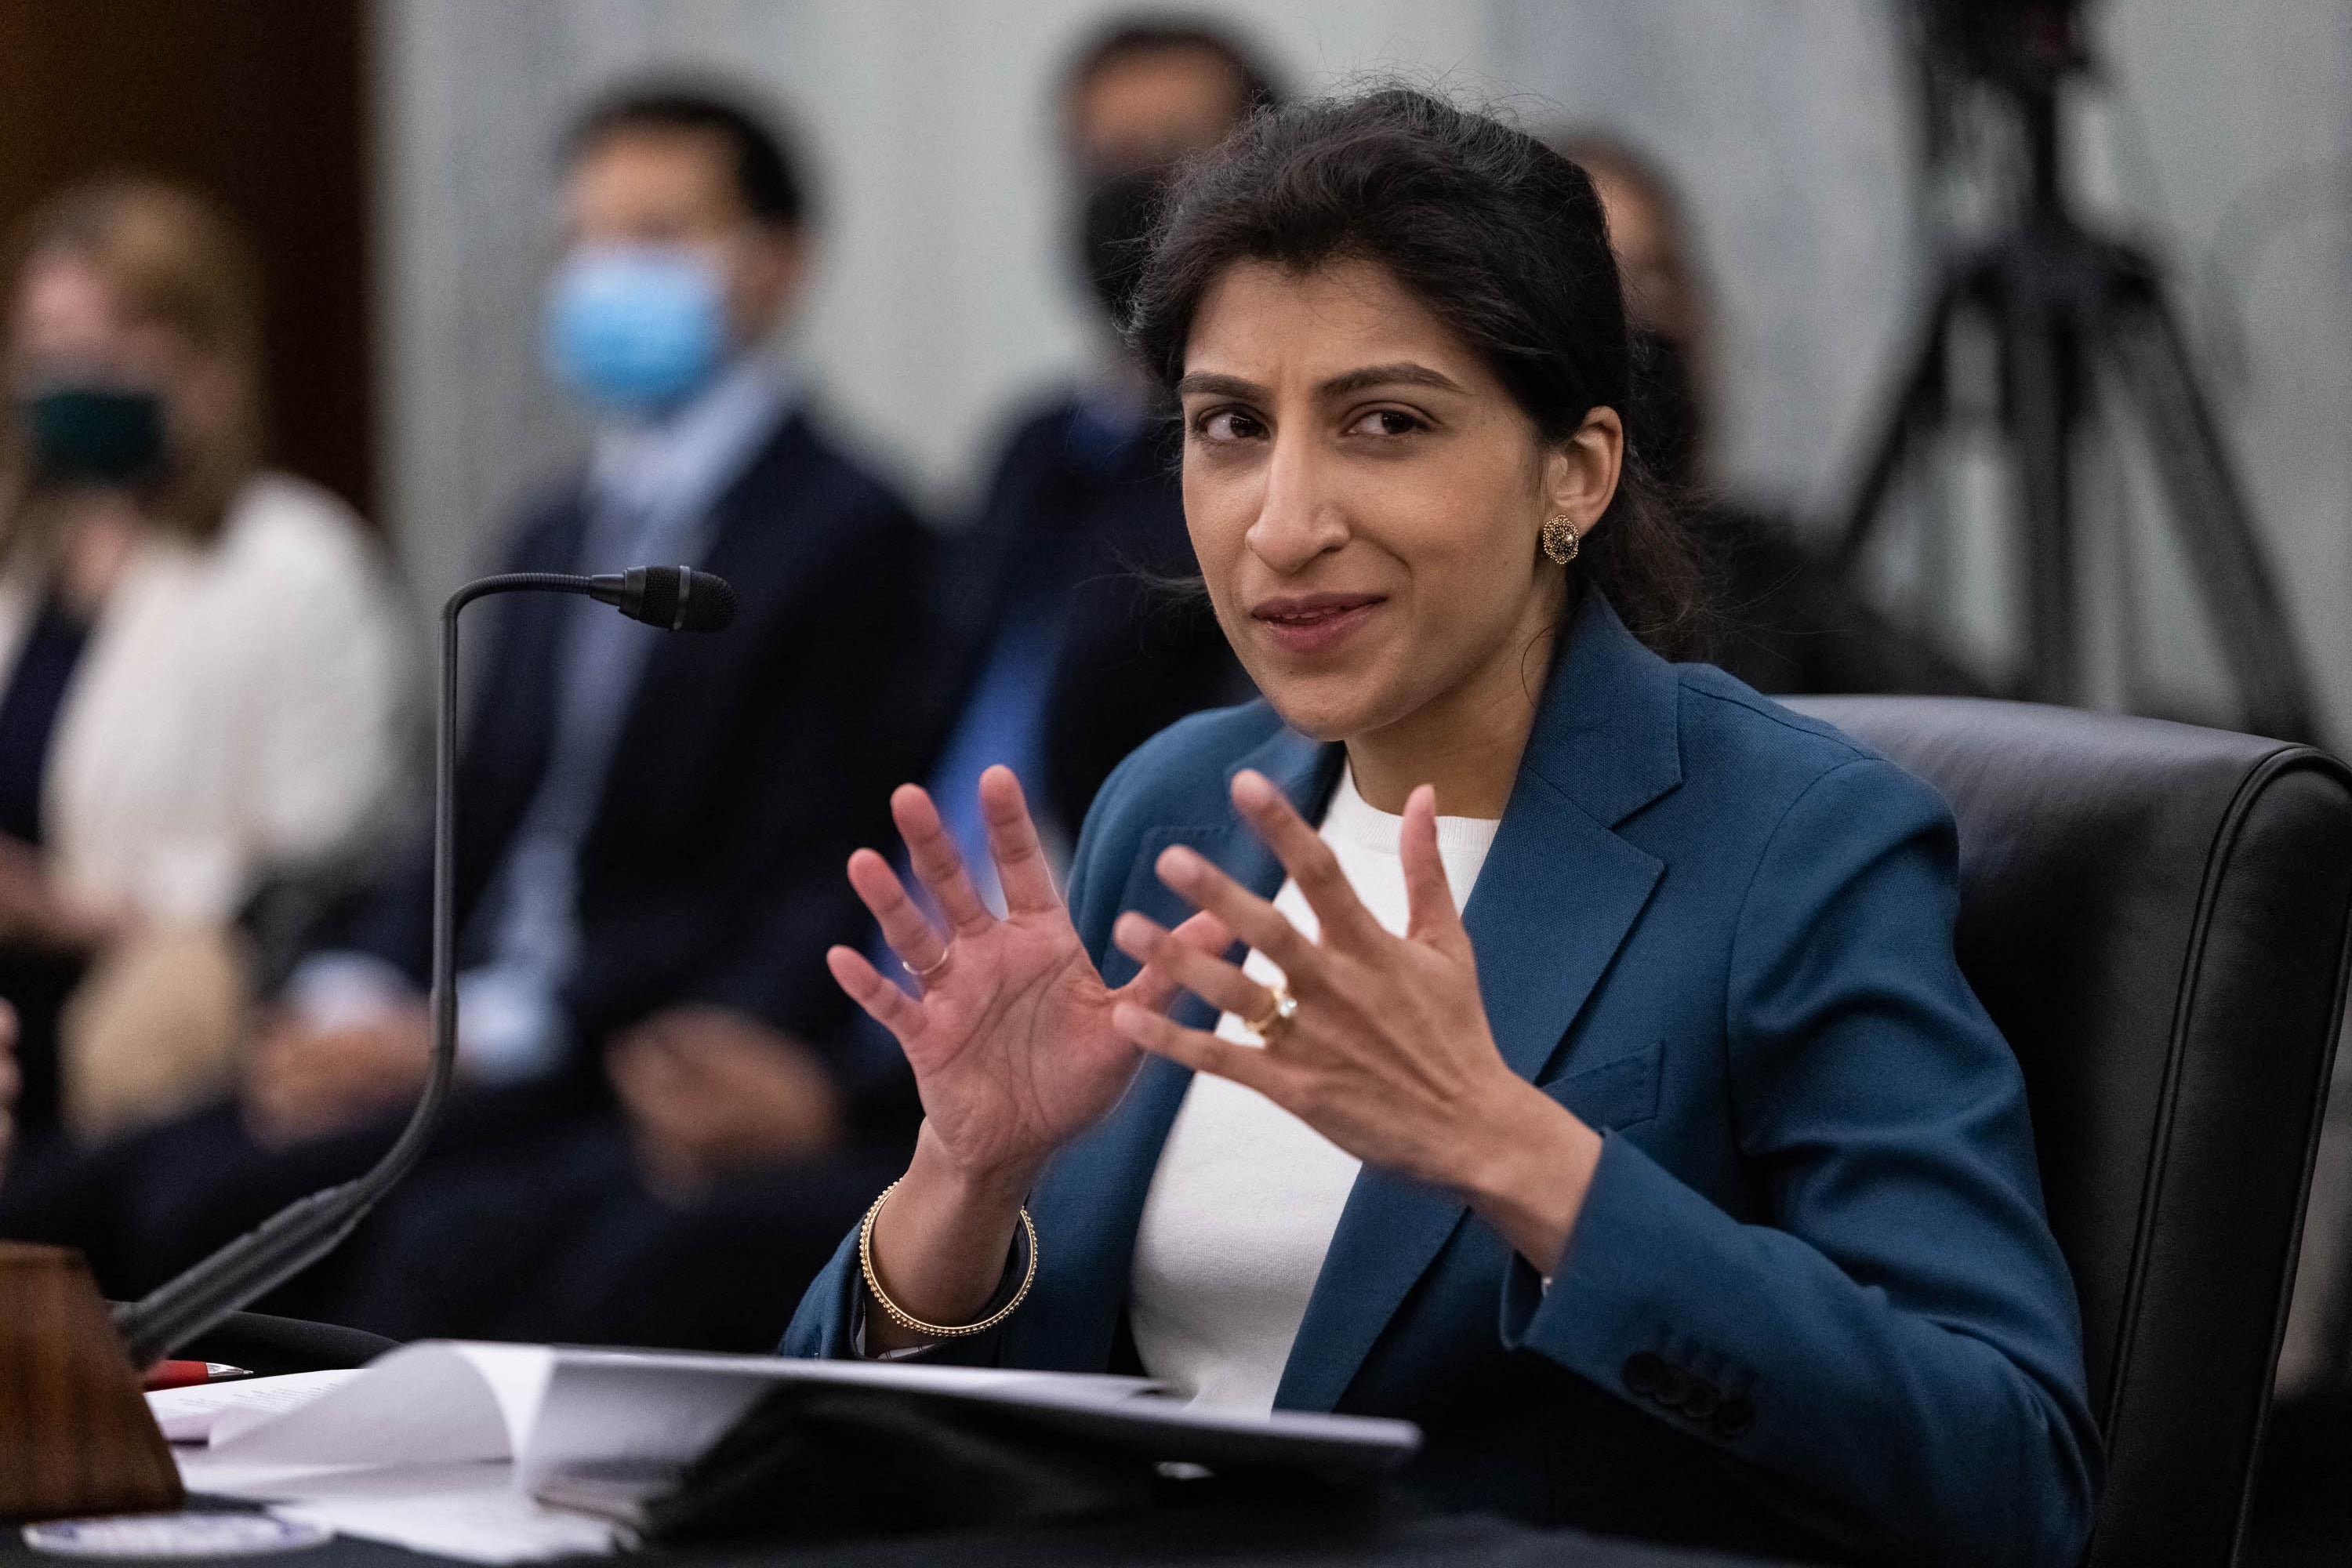 FTC Commissioner nominee Lina M. Khan testifies during a  Senate Committee on Commerce, Science, and Transportation confirmation hearing on Capitol Hill in Washington, DC, April 21, 2021. (Photo by Graeme Jennings / POOL / AFP) (Photo by GRAEME JENNINGS/POOL/AFP via Getty Images)